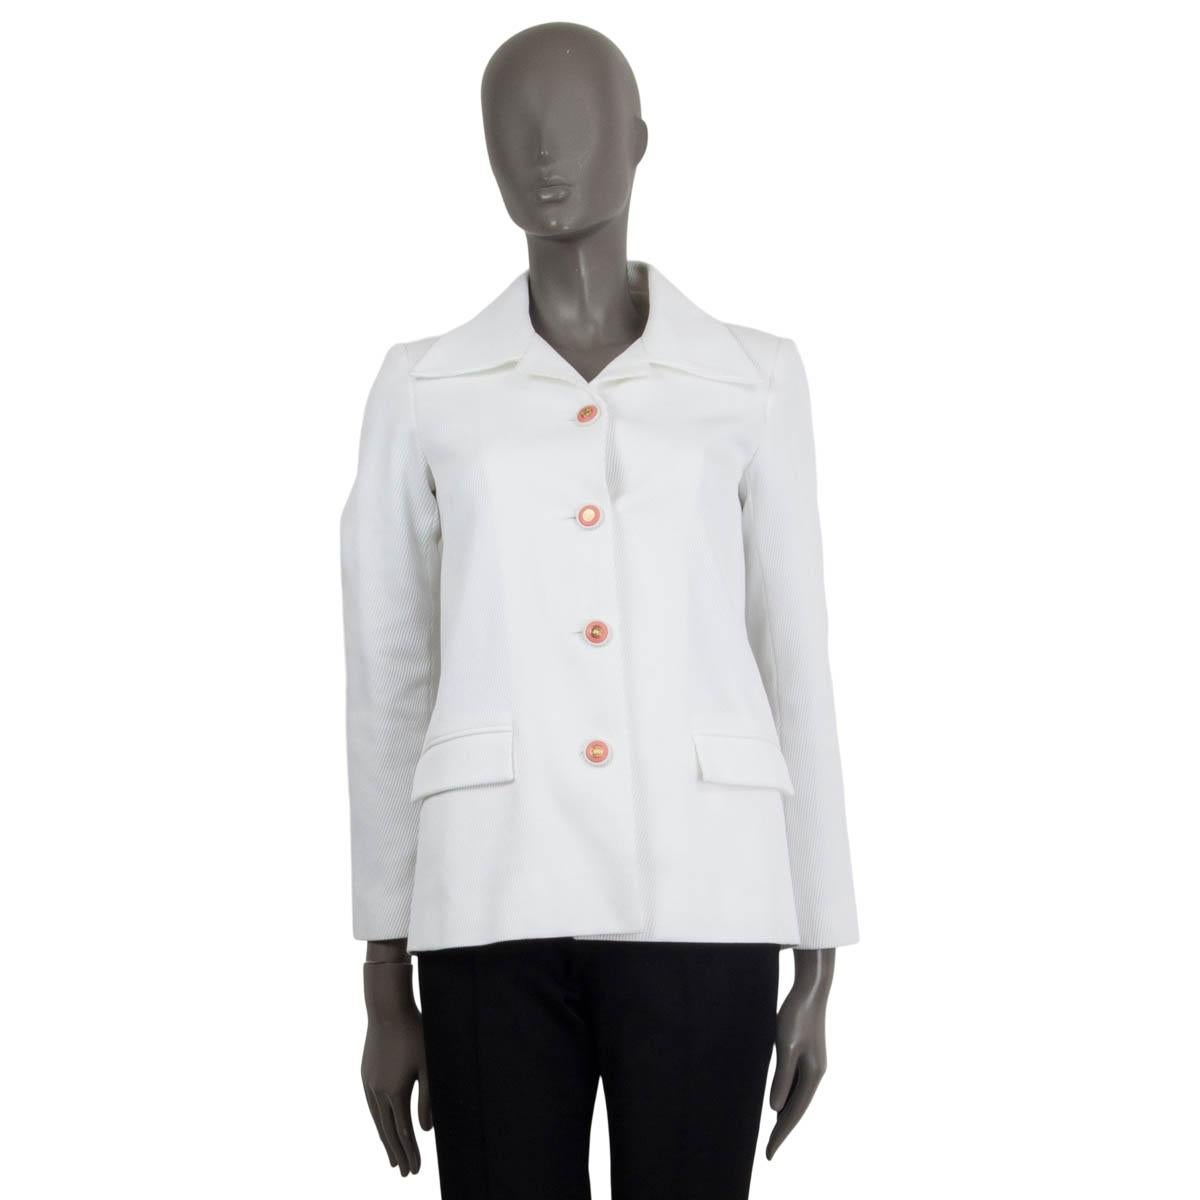 100% authentic Chanel Spring/Summer 2015 ribbed blazer in white cotton (100%). Comes with the signature chain around the inside of the hemline and has two sewn-shut pockets on the front. Opens with four pink CC buttons on the front and the cuffs.